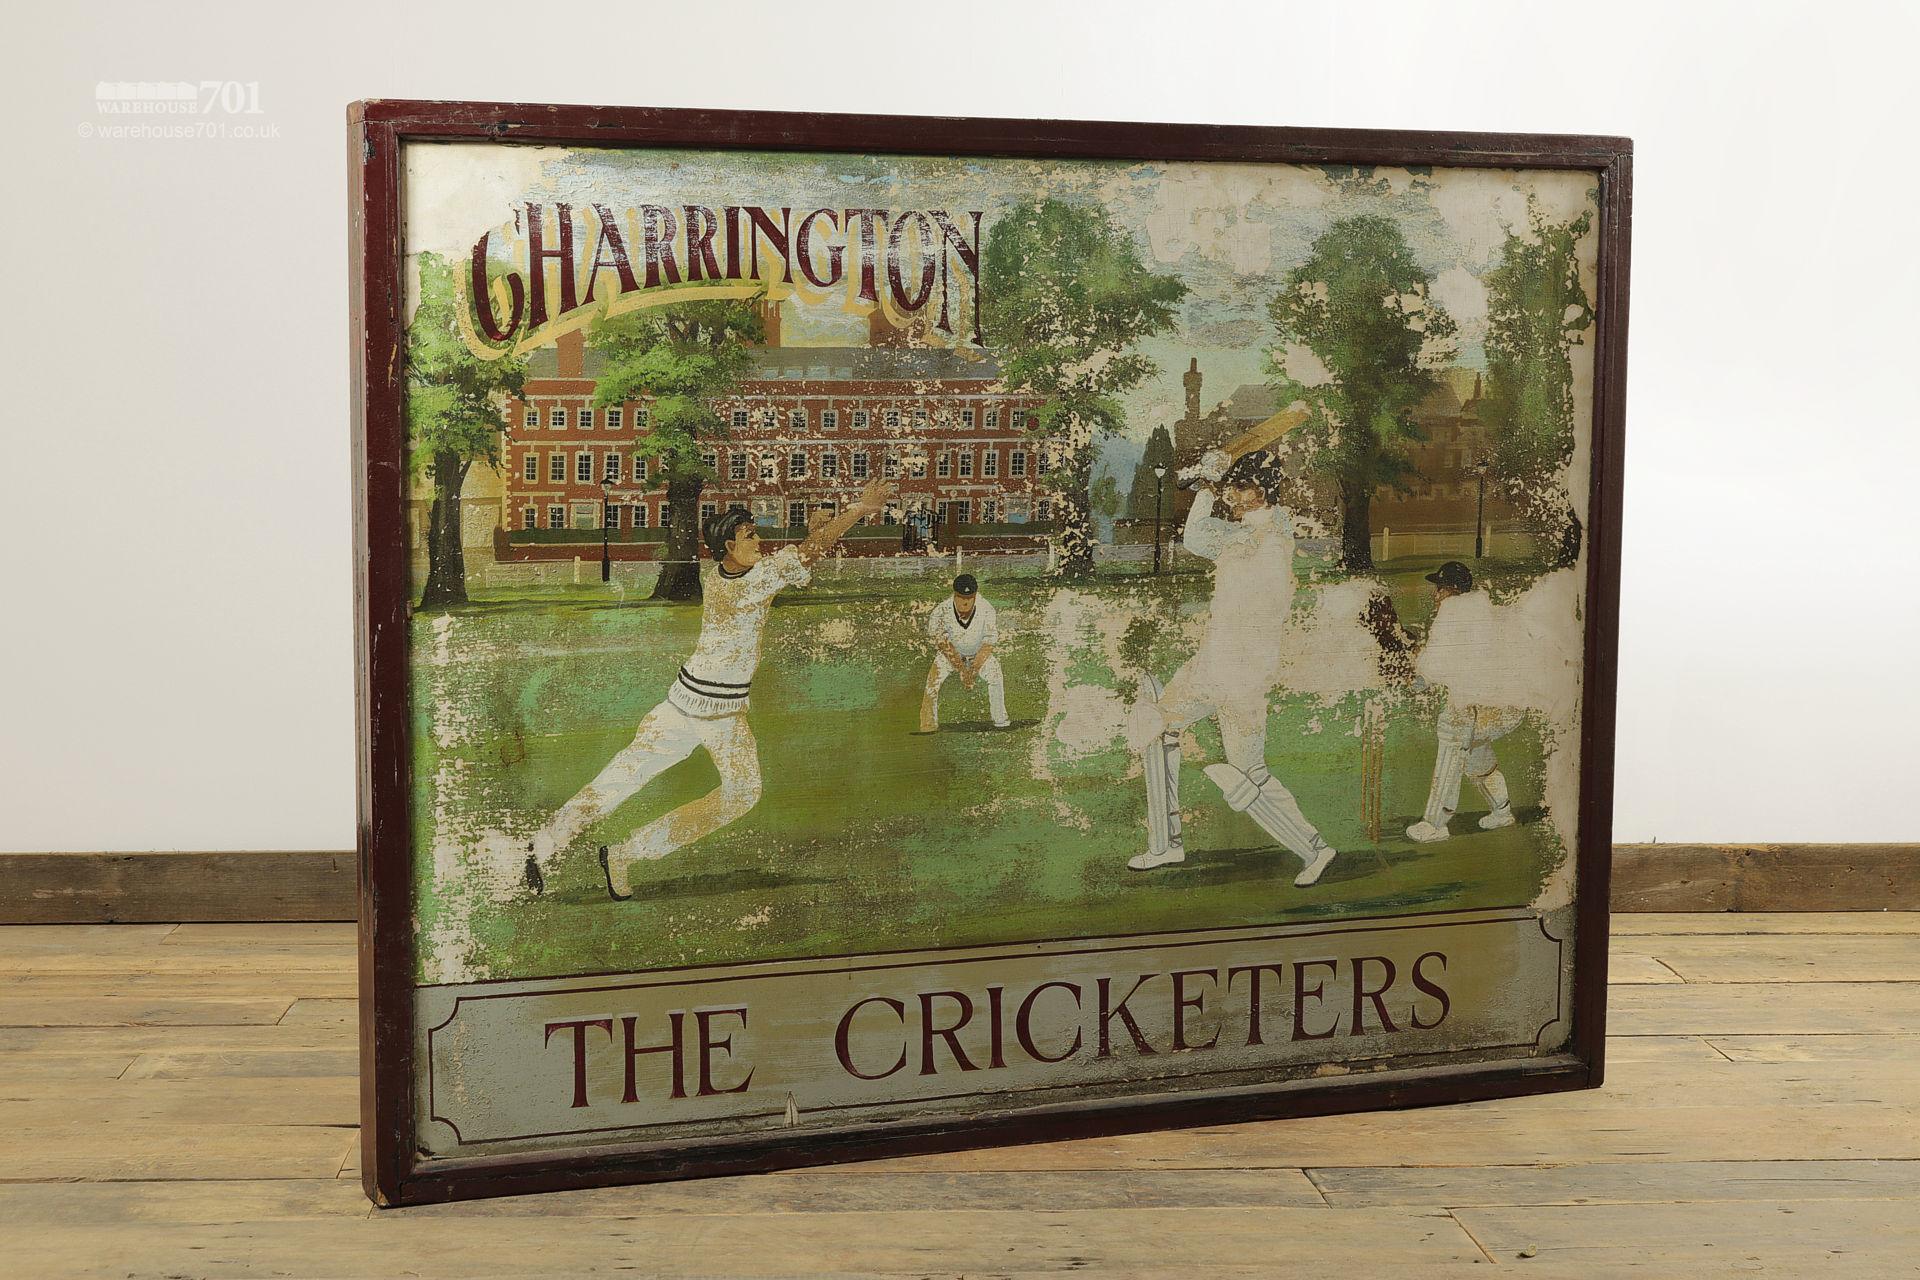 Salvaged Cricketers Double Sided Pub Sign #1